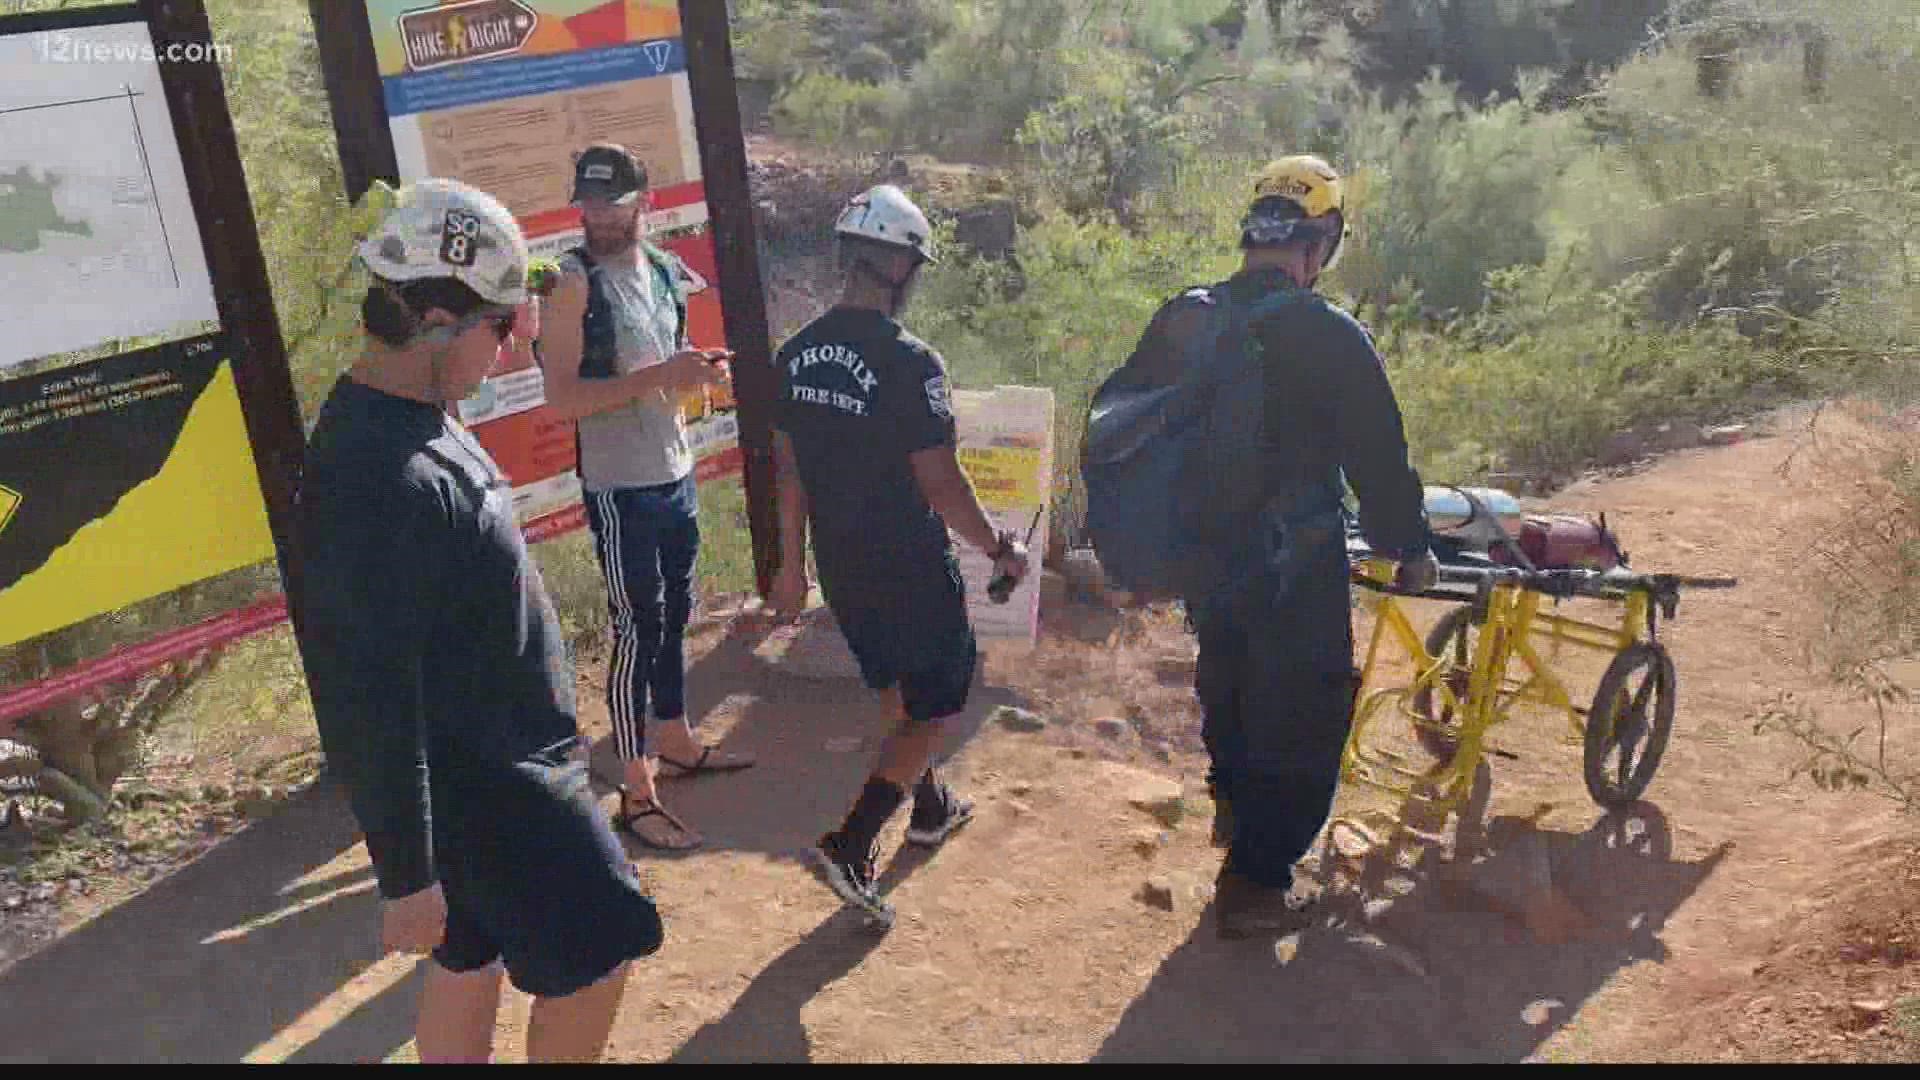 The Phoenix Fire Department will soon have a new, high-tech tool to use during the hundreds of mountain rescues it responds to.